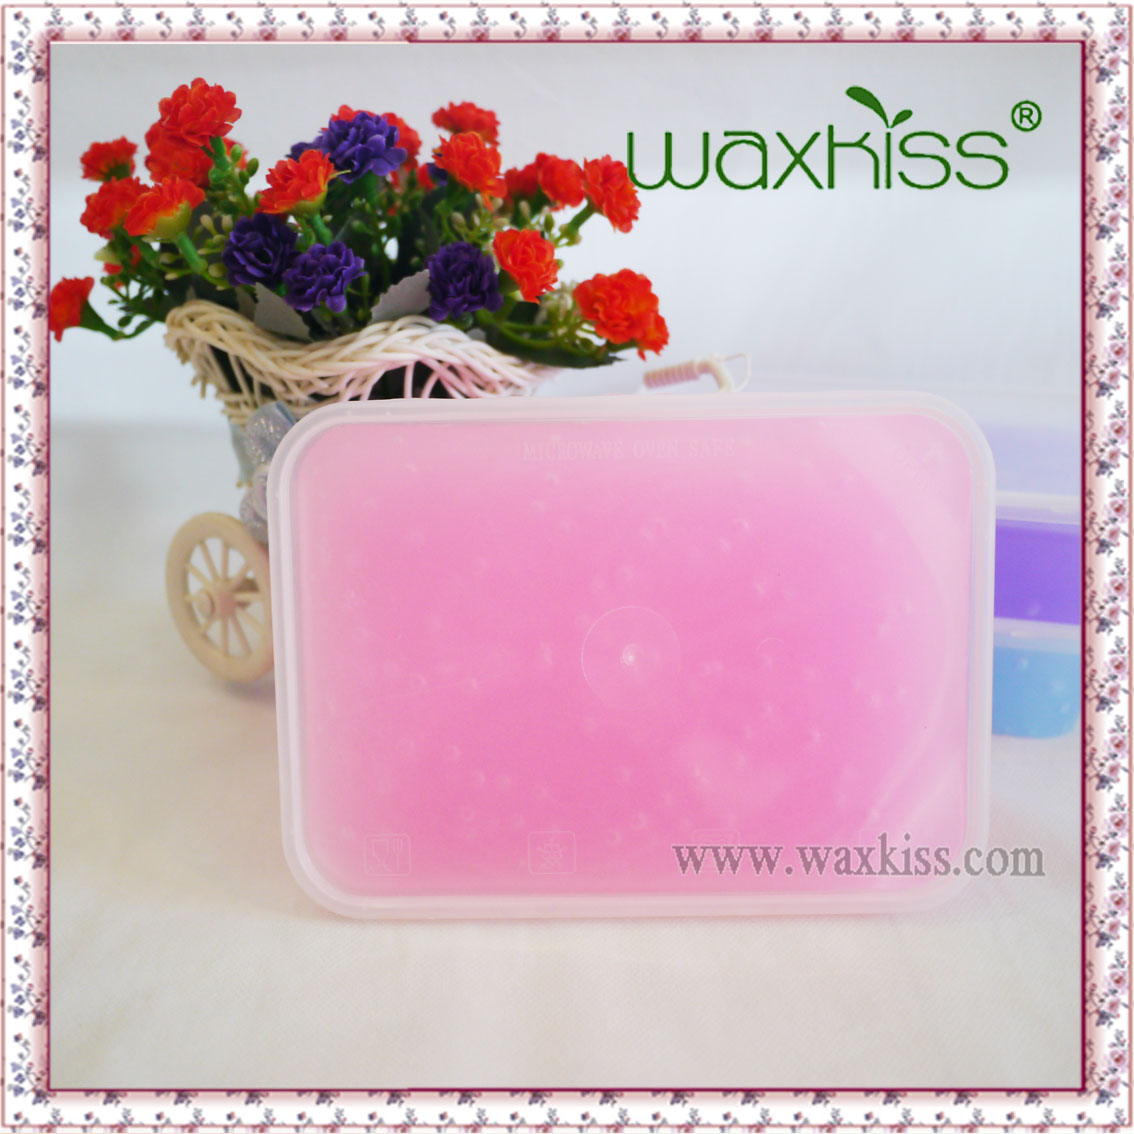 cosmetic paraffin wax for skin care